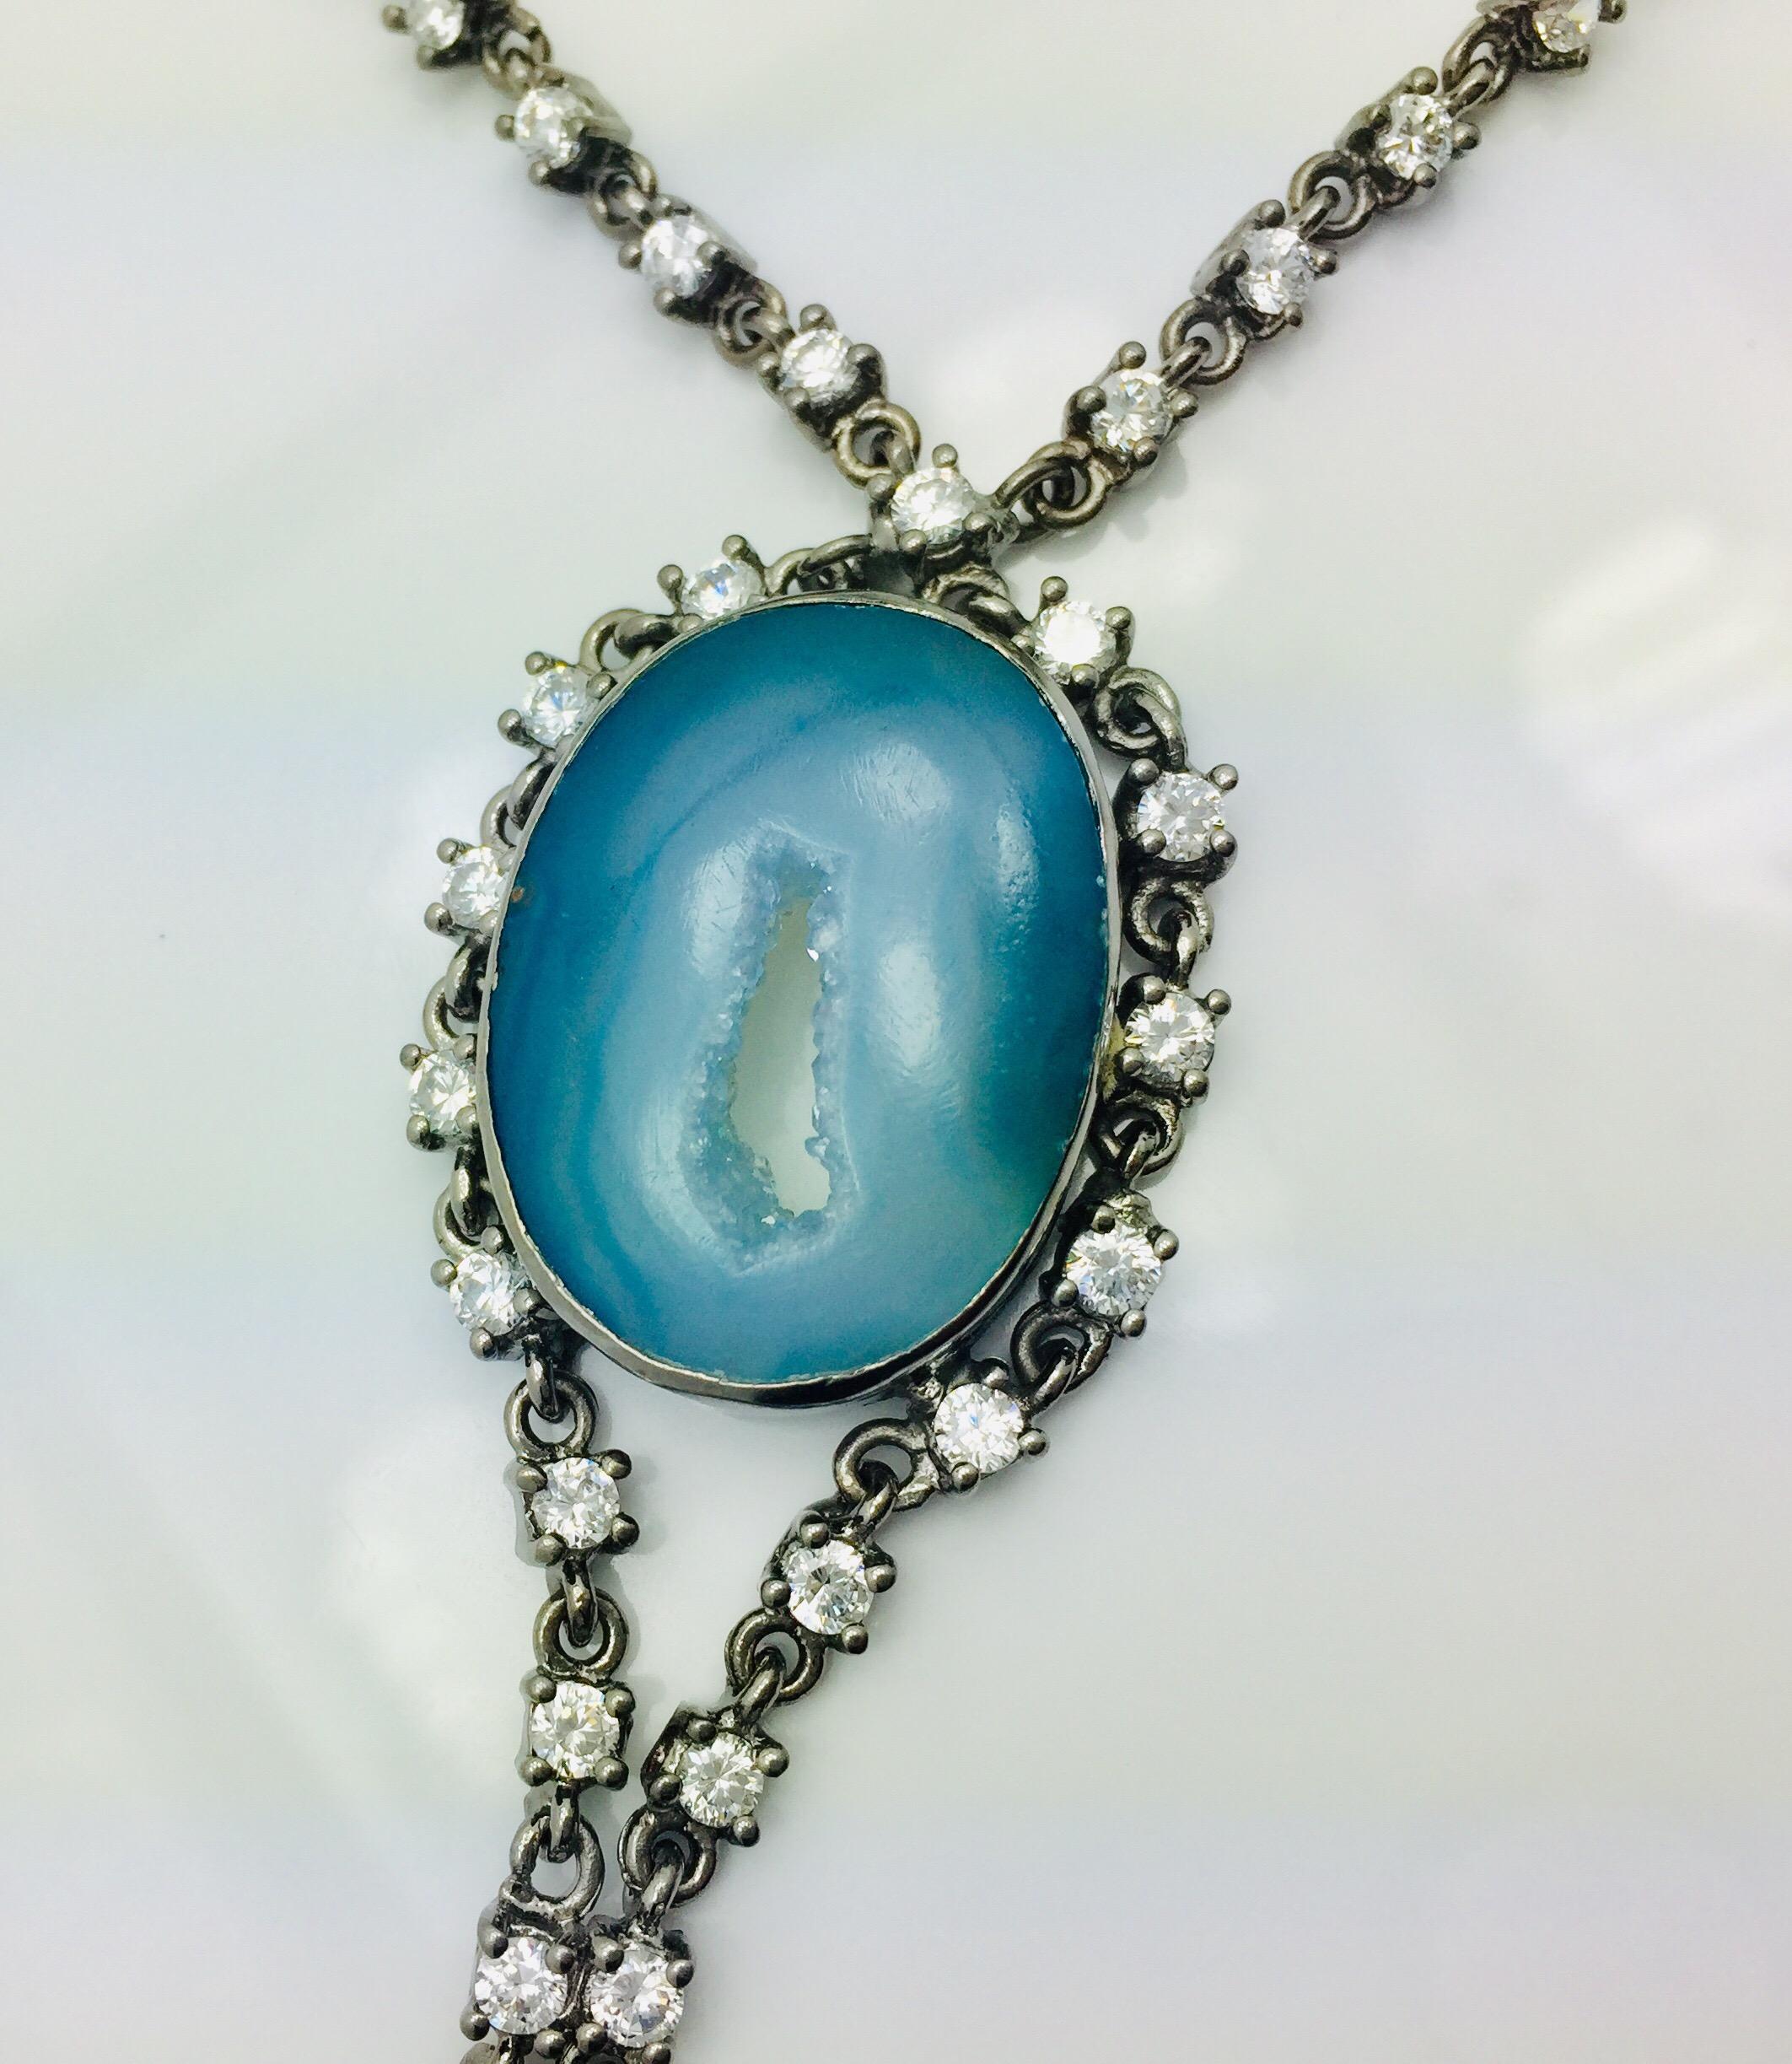 Handmade Agate Geode Druzy necklace is crafted with oxidized black rhodium chain.  The necklace features a statement aqua blue crater geode druzy embellished with cubic zircon. 

FOLLOW  MEGHNA JEWELS storefront to view the latest collection &